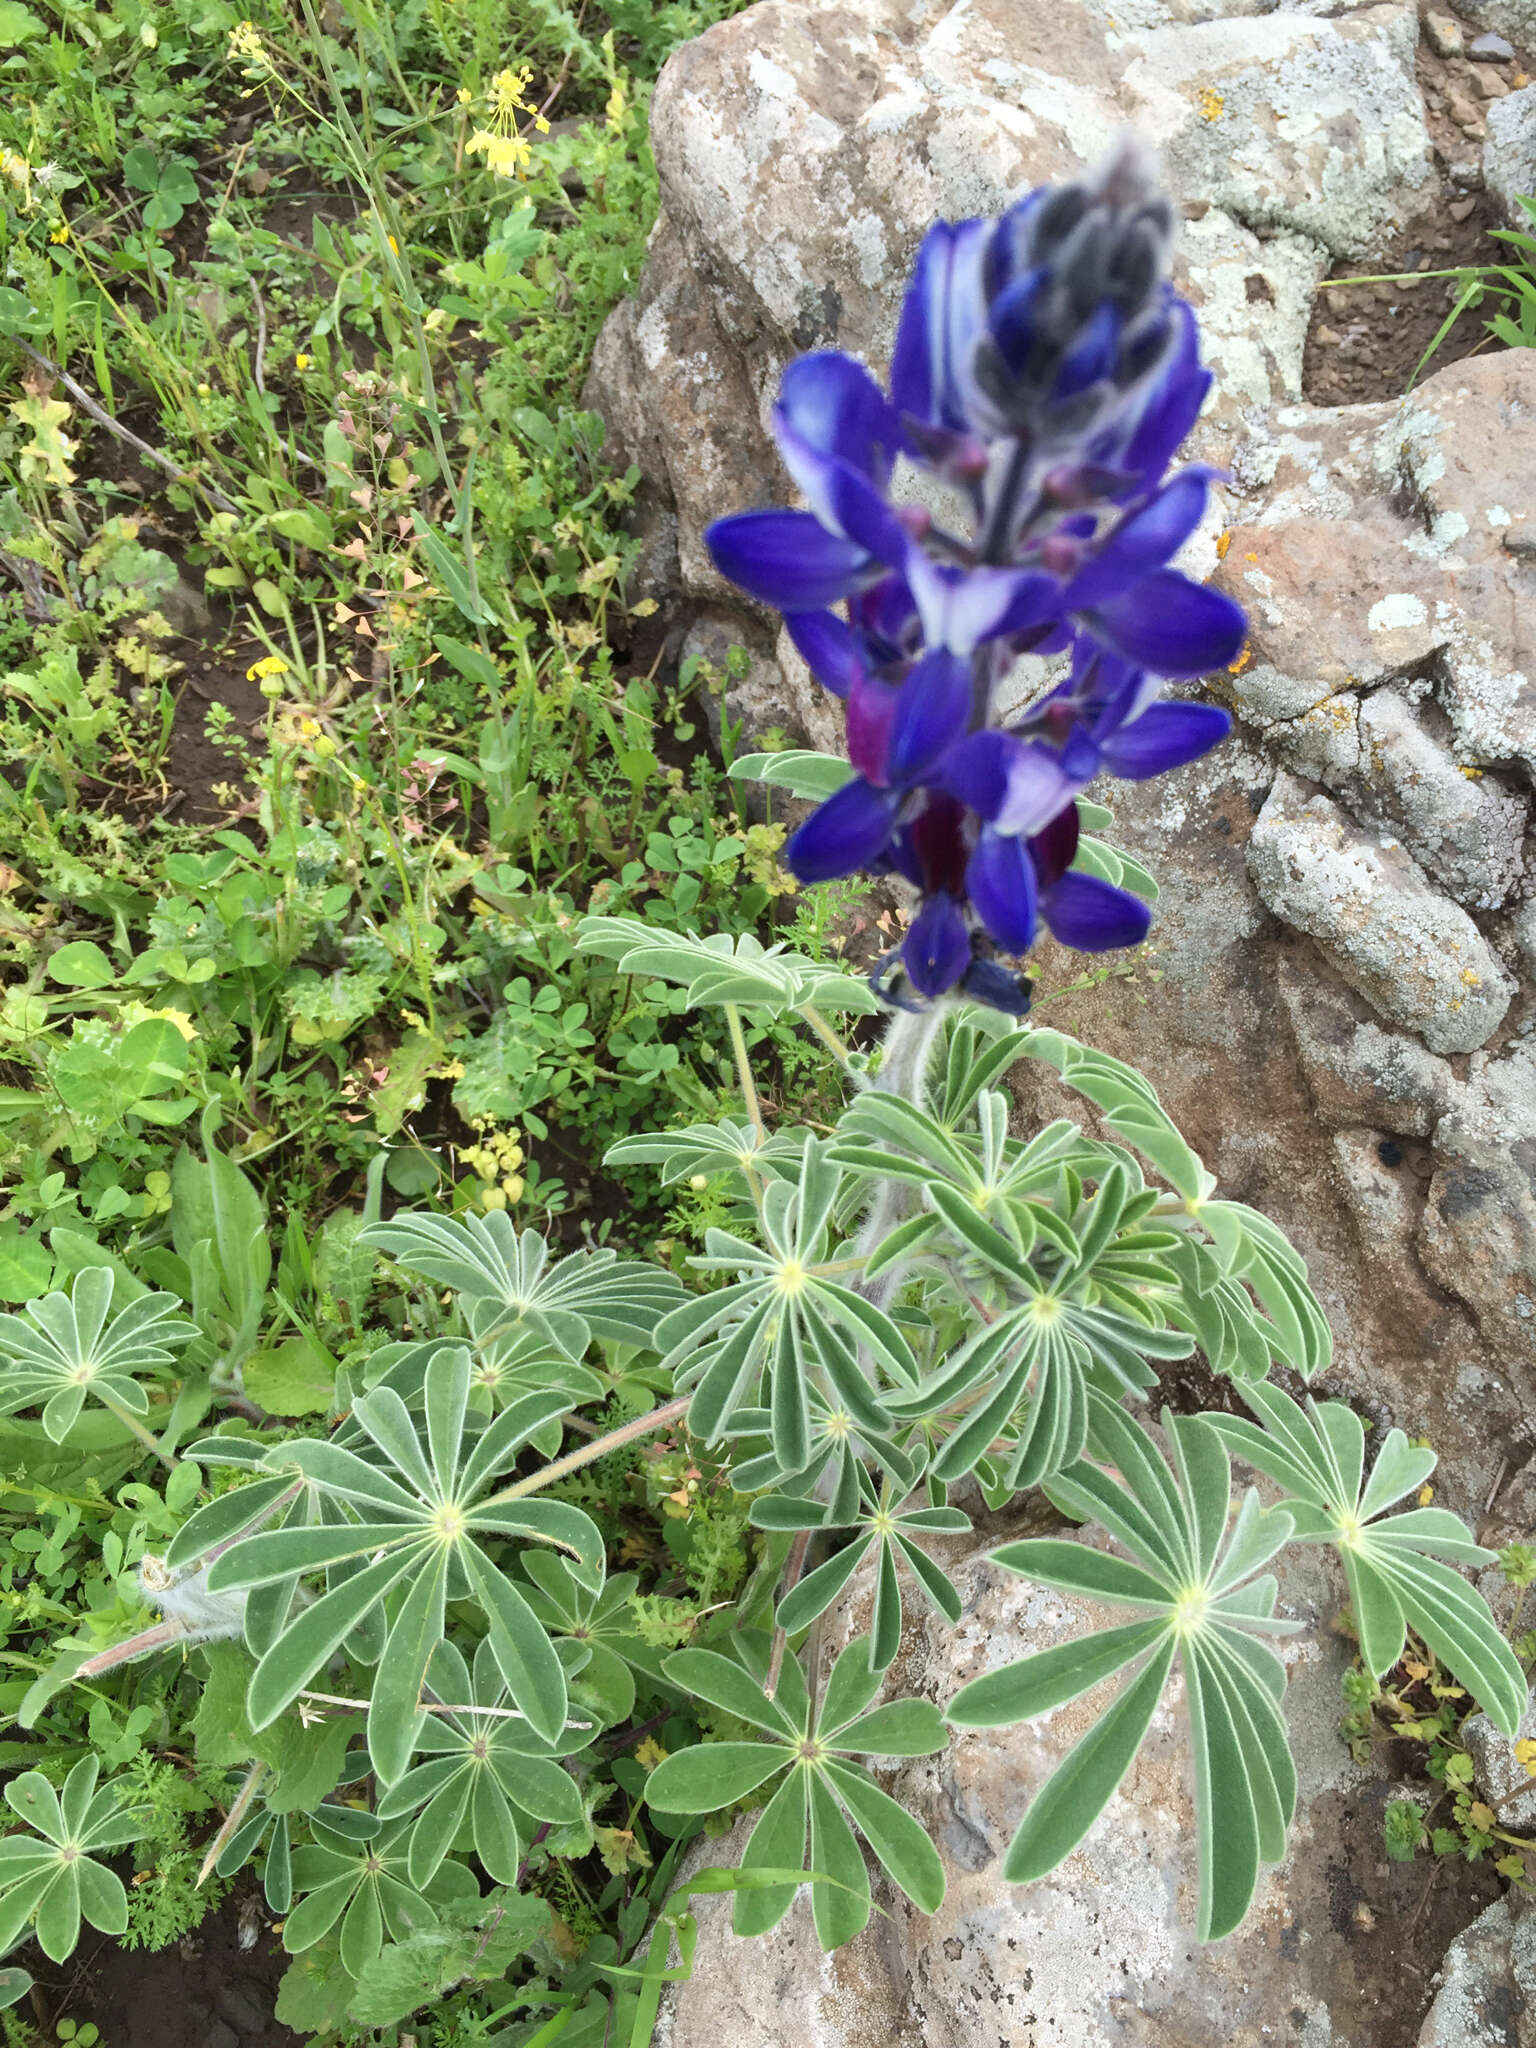 Image of blue lupine